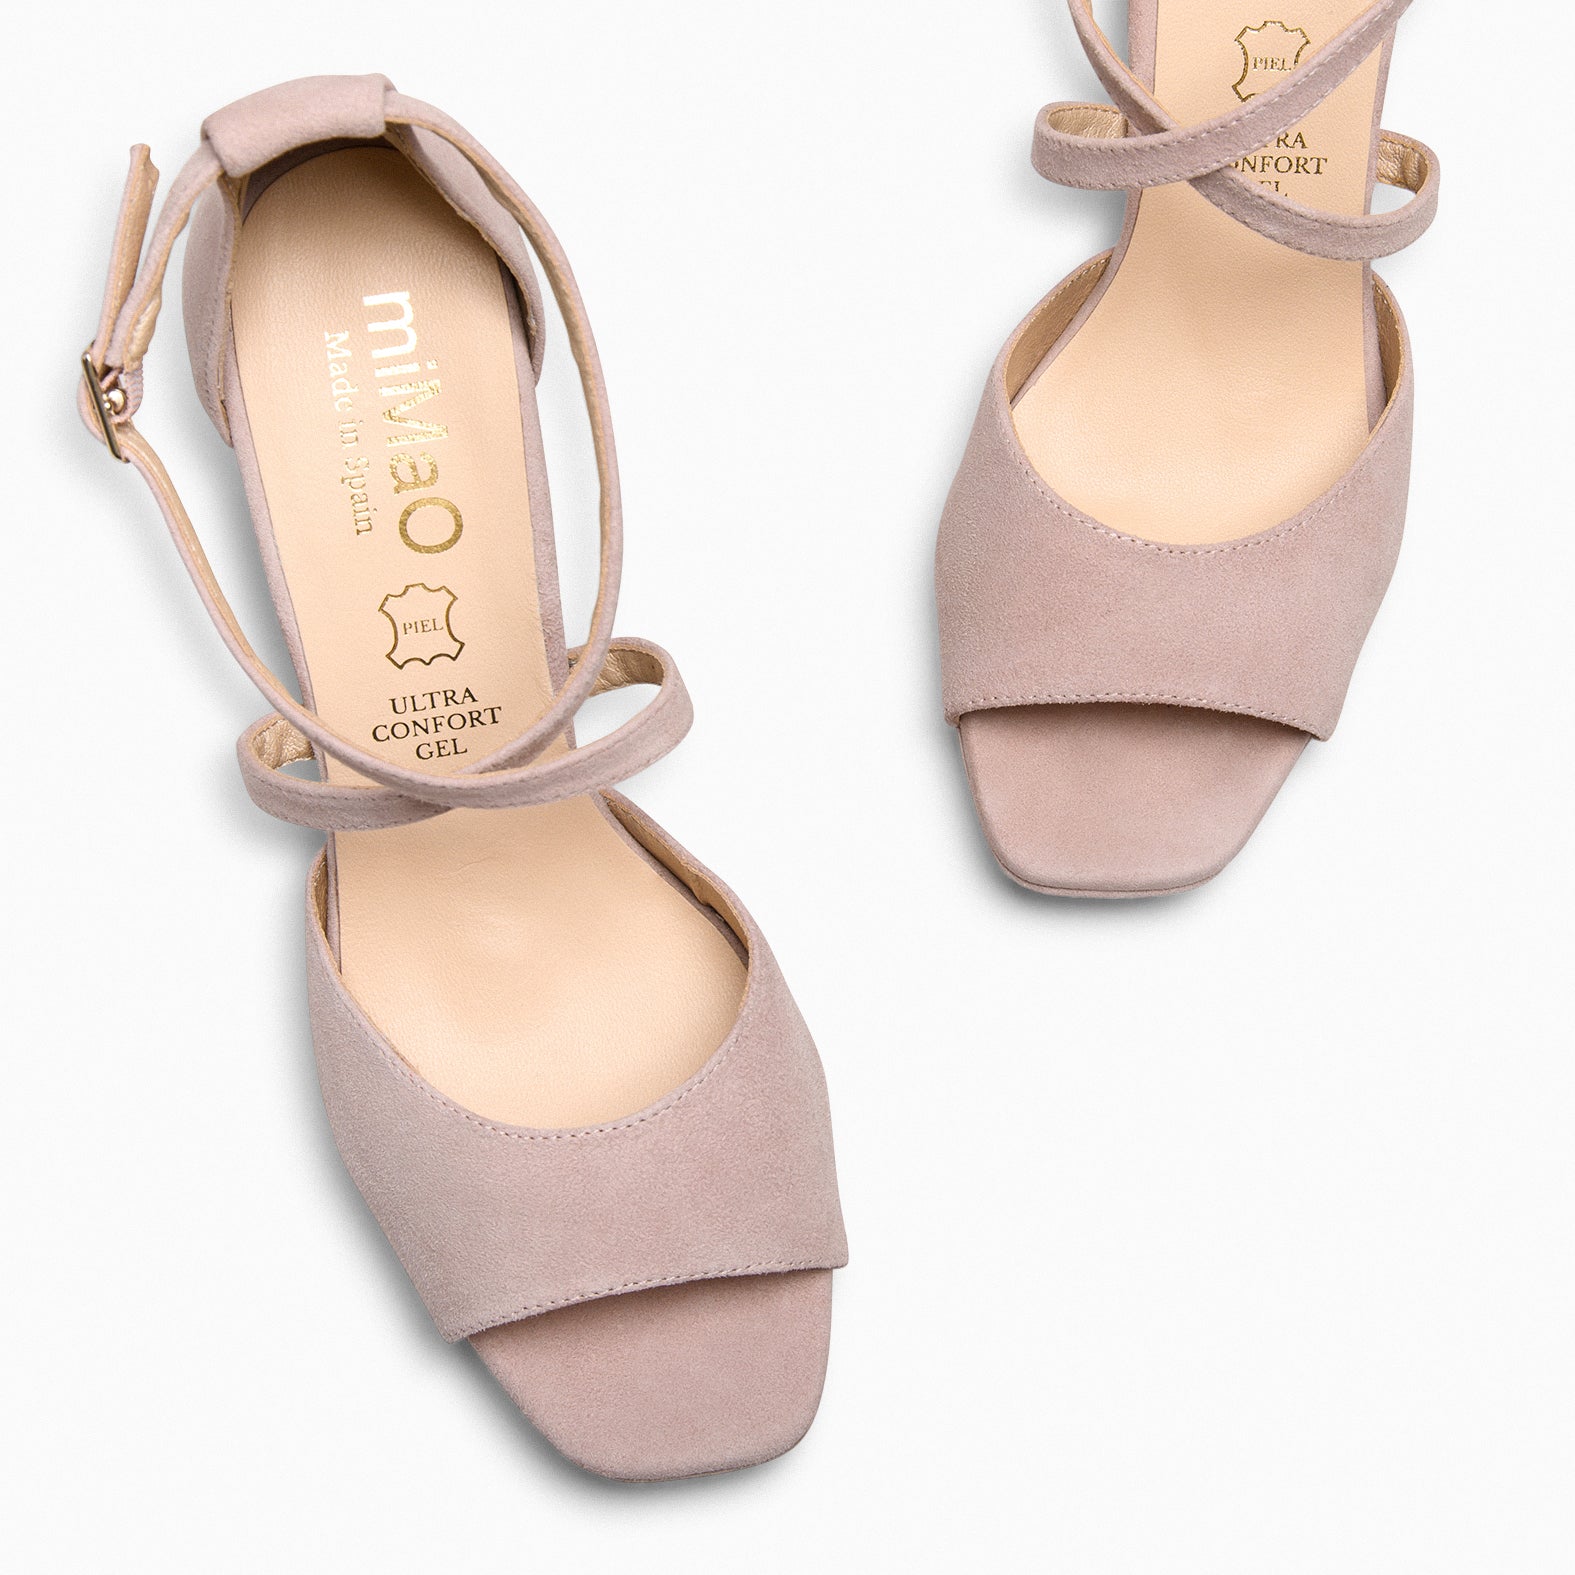 ROSSA - NUDE party sandals with heel